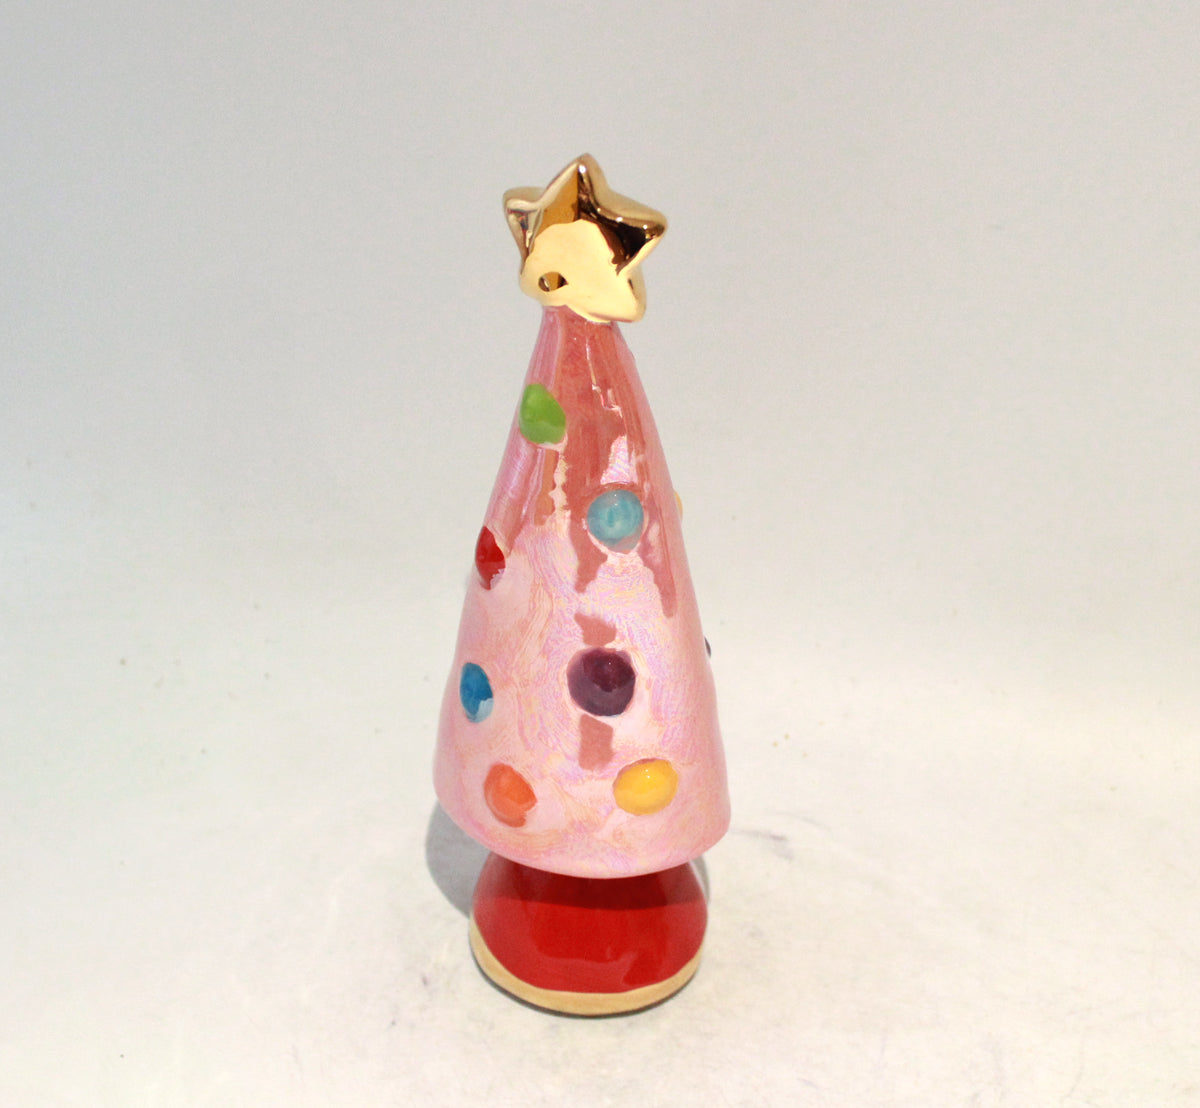 Small Christmas Tree in Iridescent Pink with Red Base